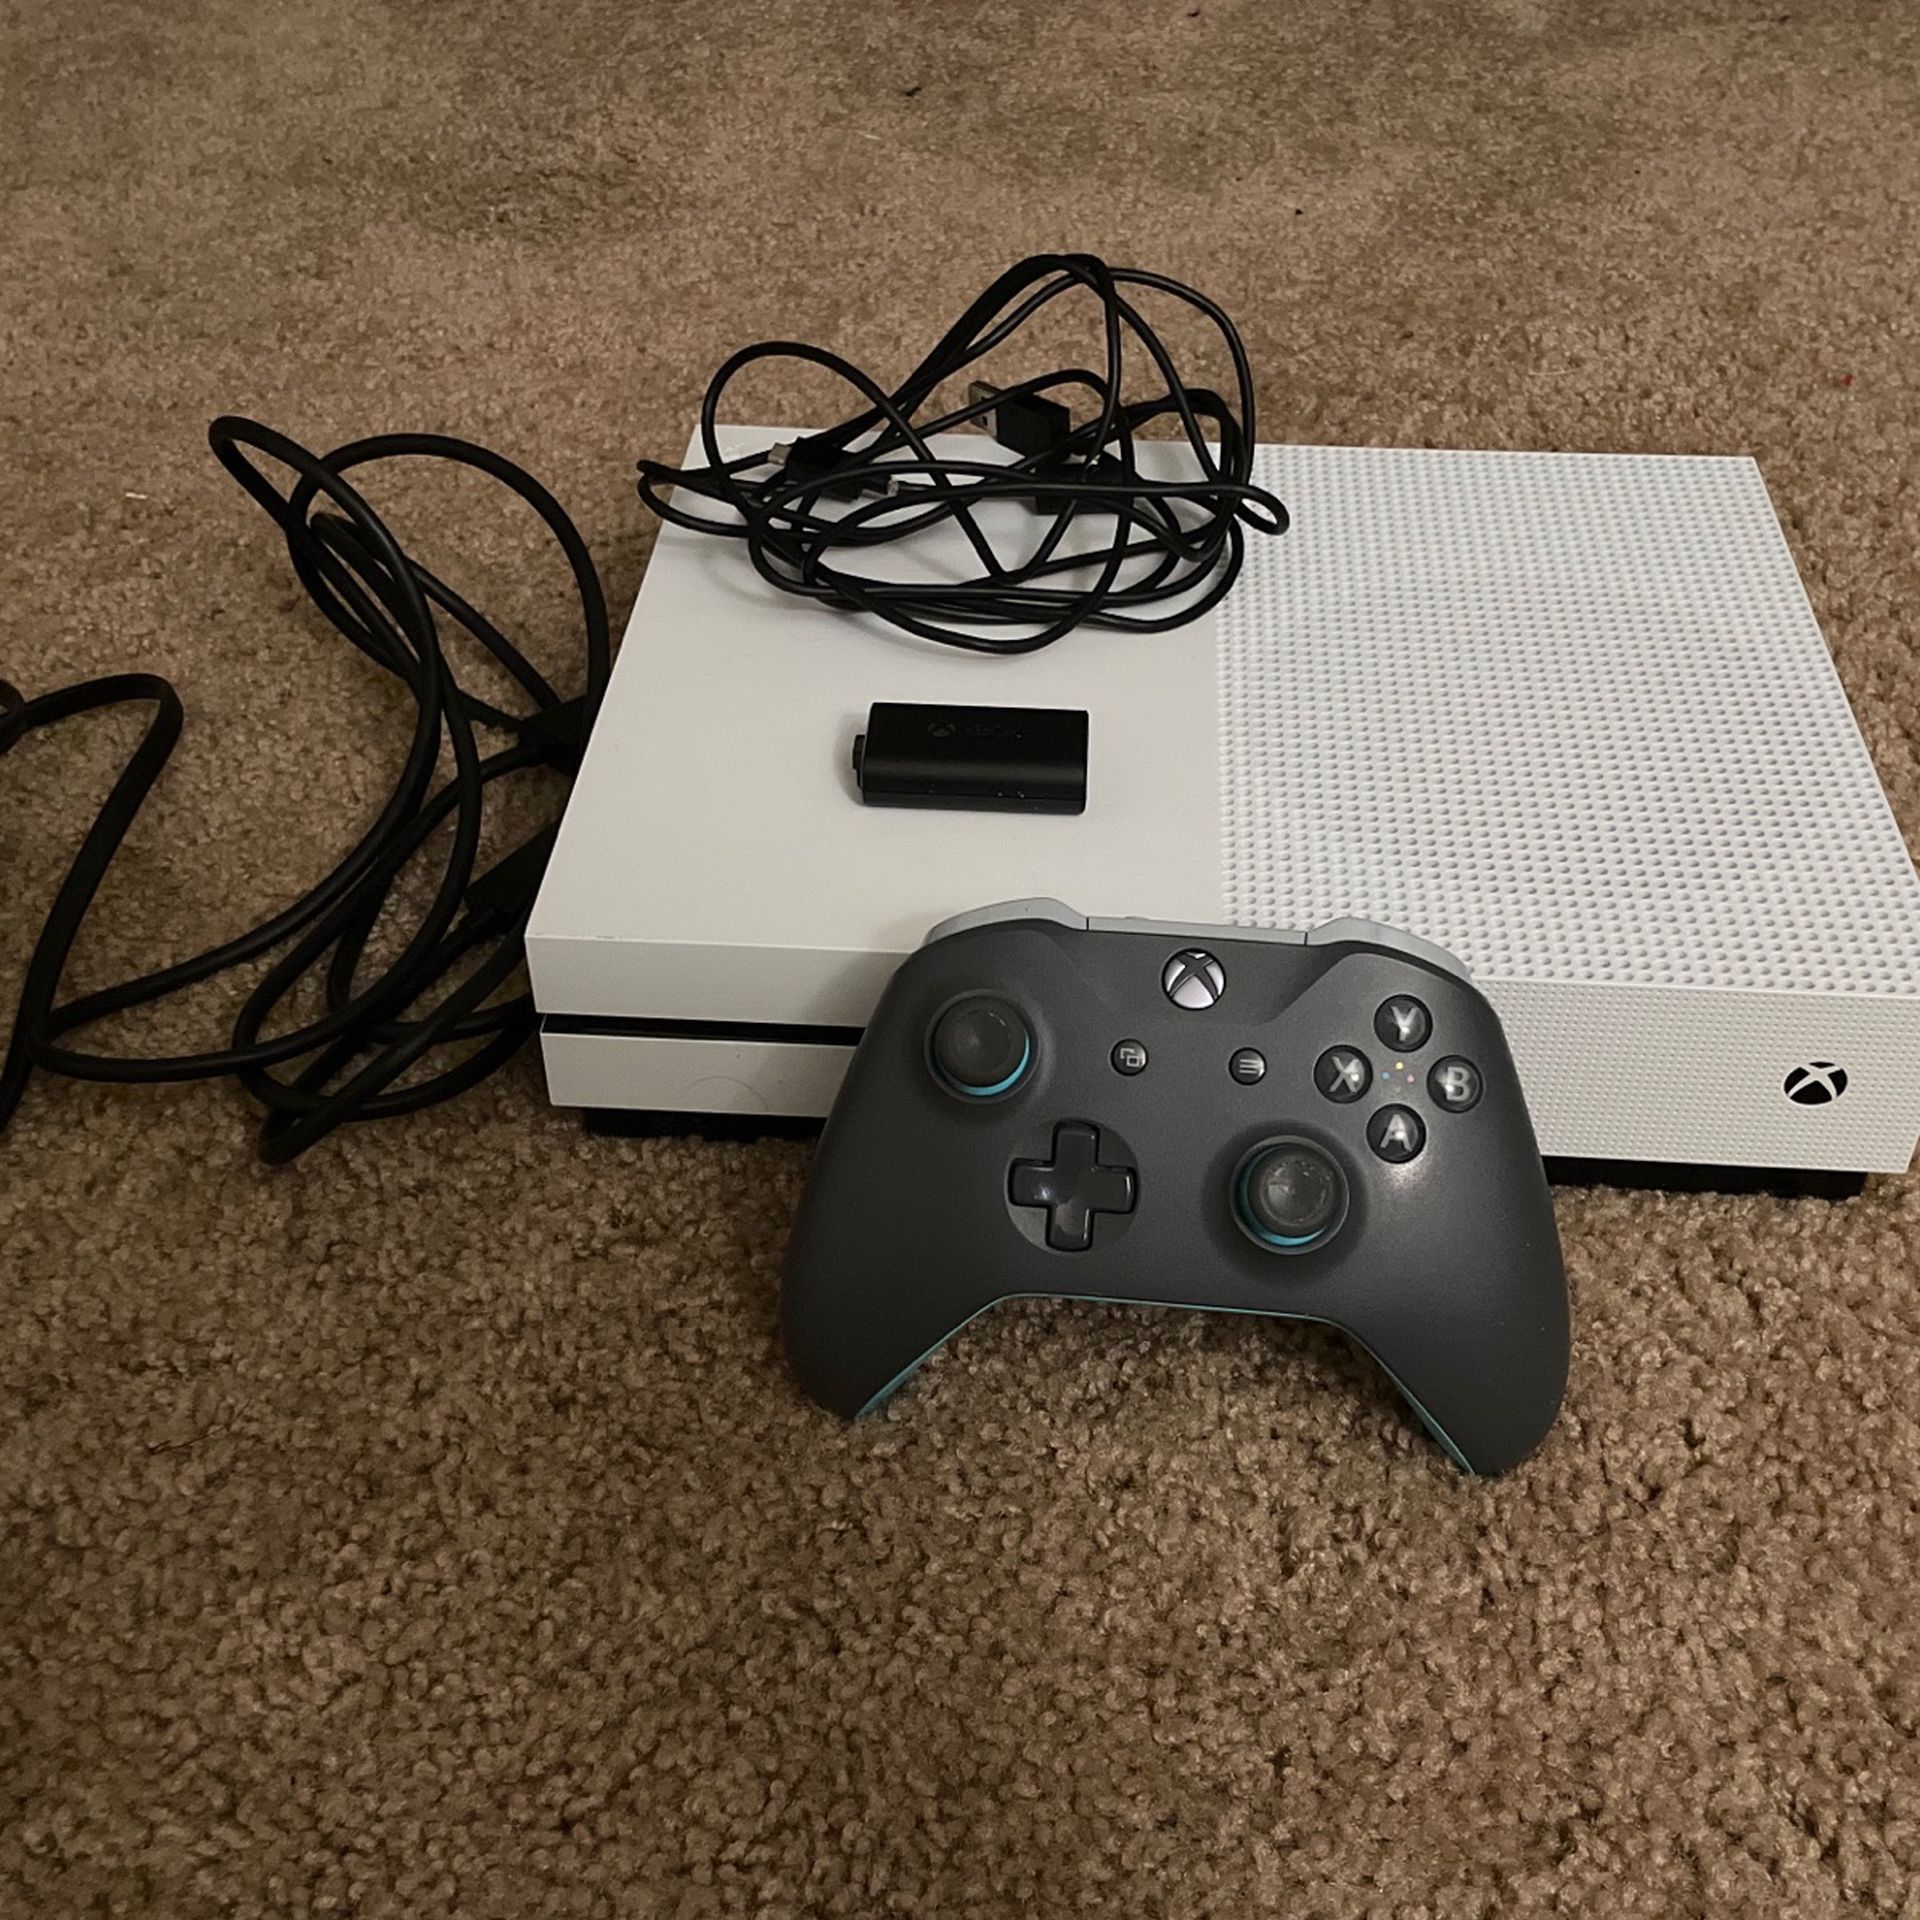 Xbox One S 1TB, Includes: Xbox One S, Power Cable, HDMI , Gray/blue Controller, Rechargeable Battery